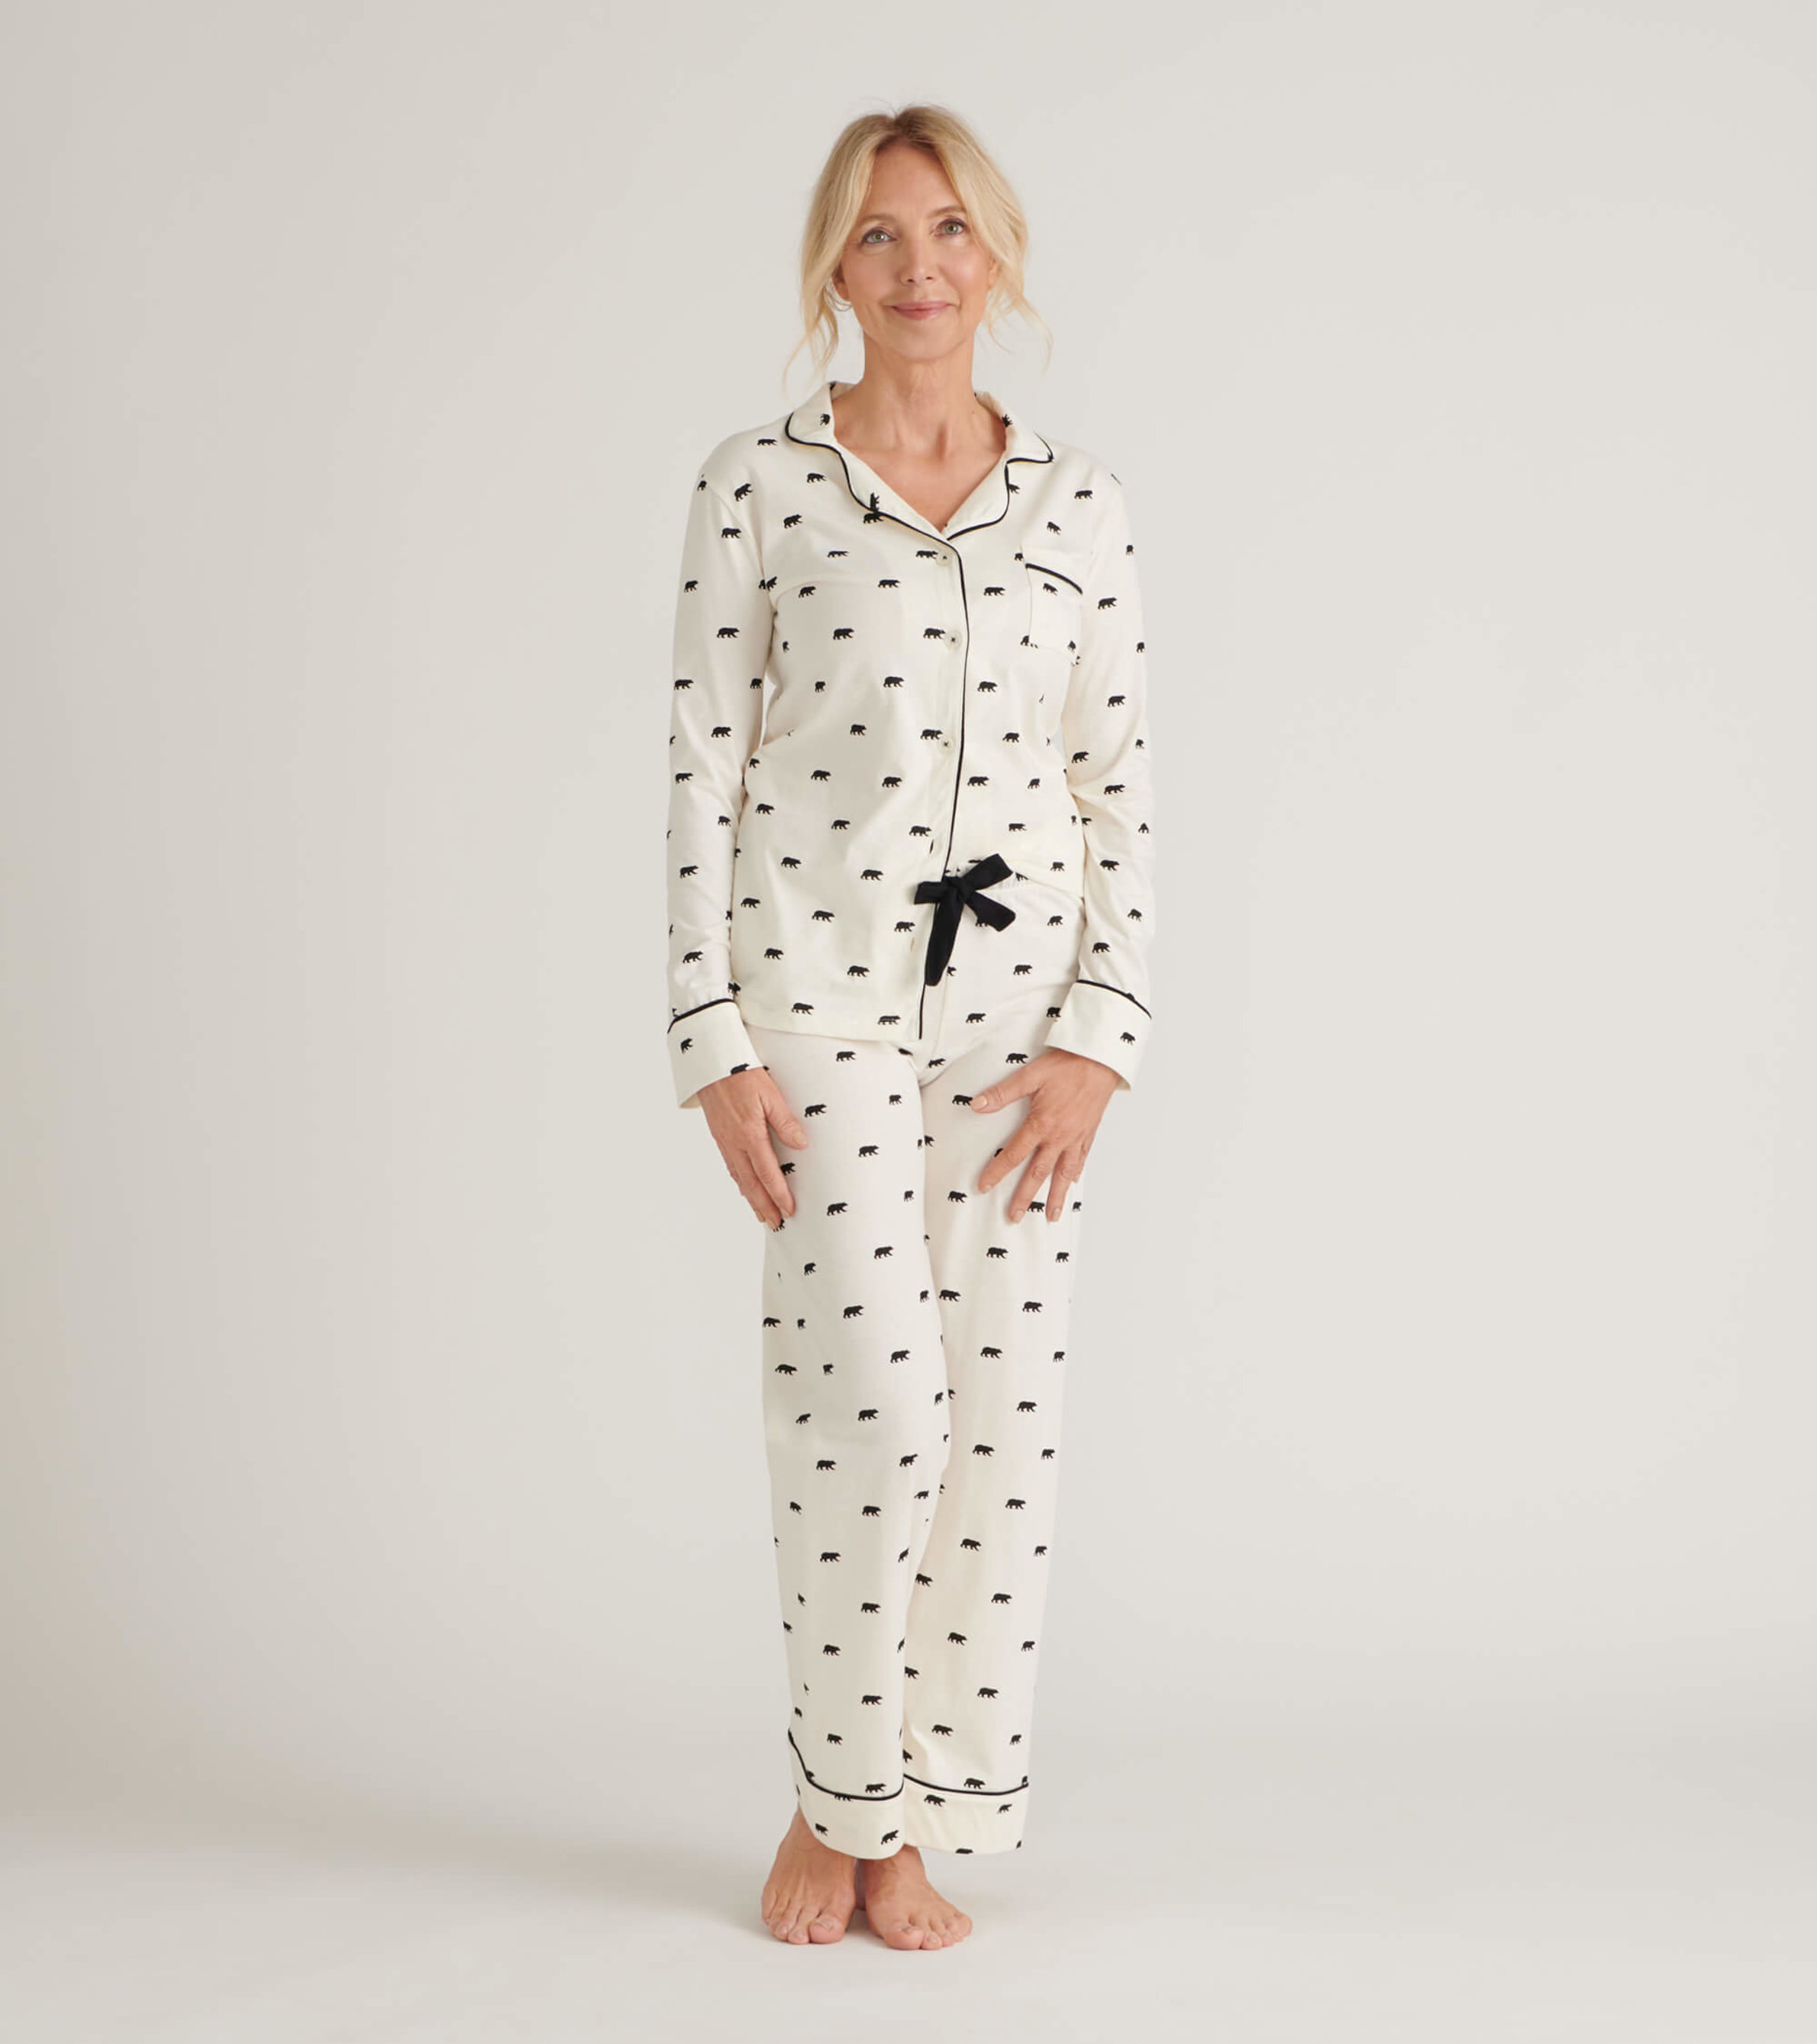 Pajama outfit for women's